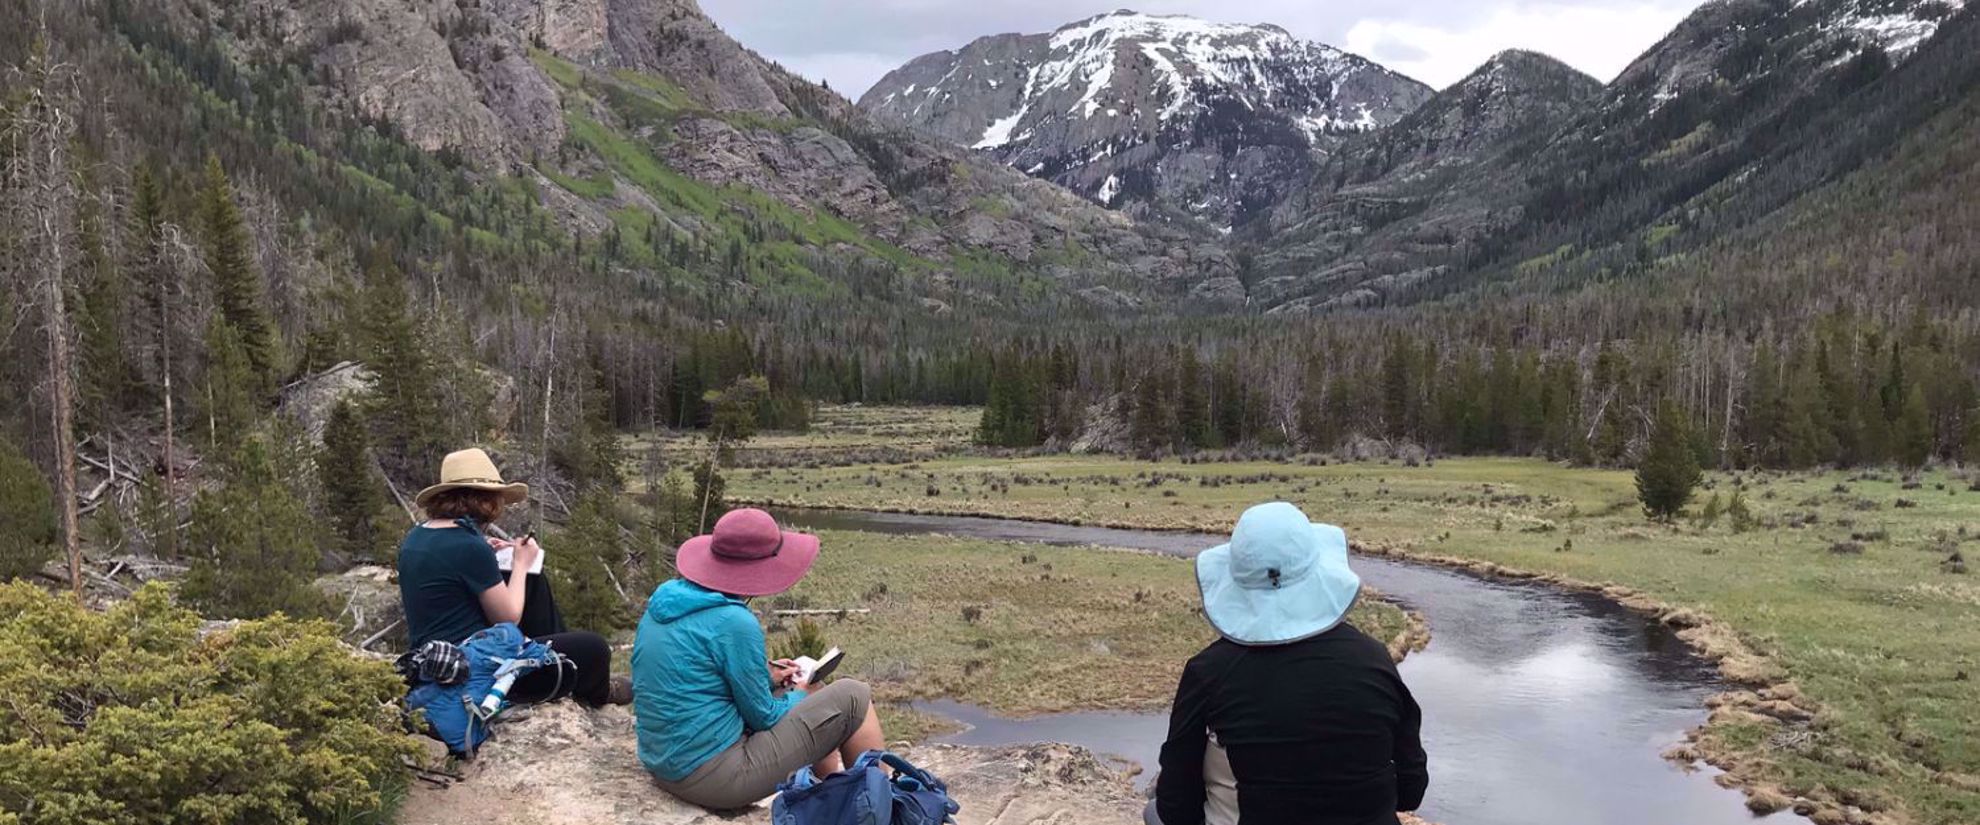 Hiking and Sketching in the Colorado Rockies | Grand Lake, CO